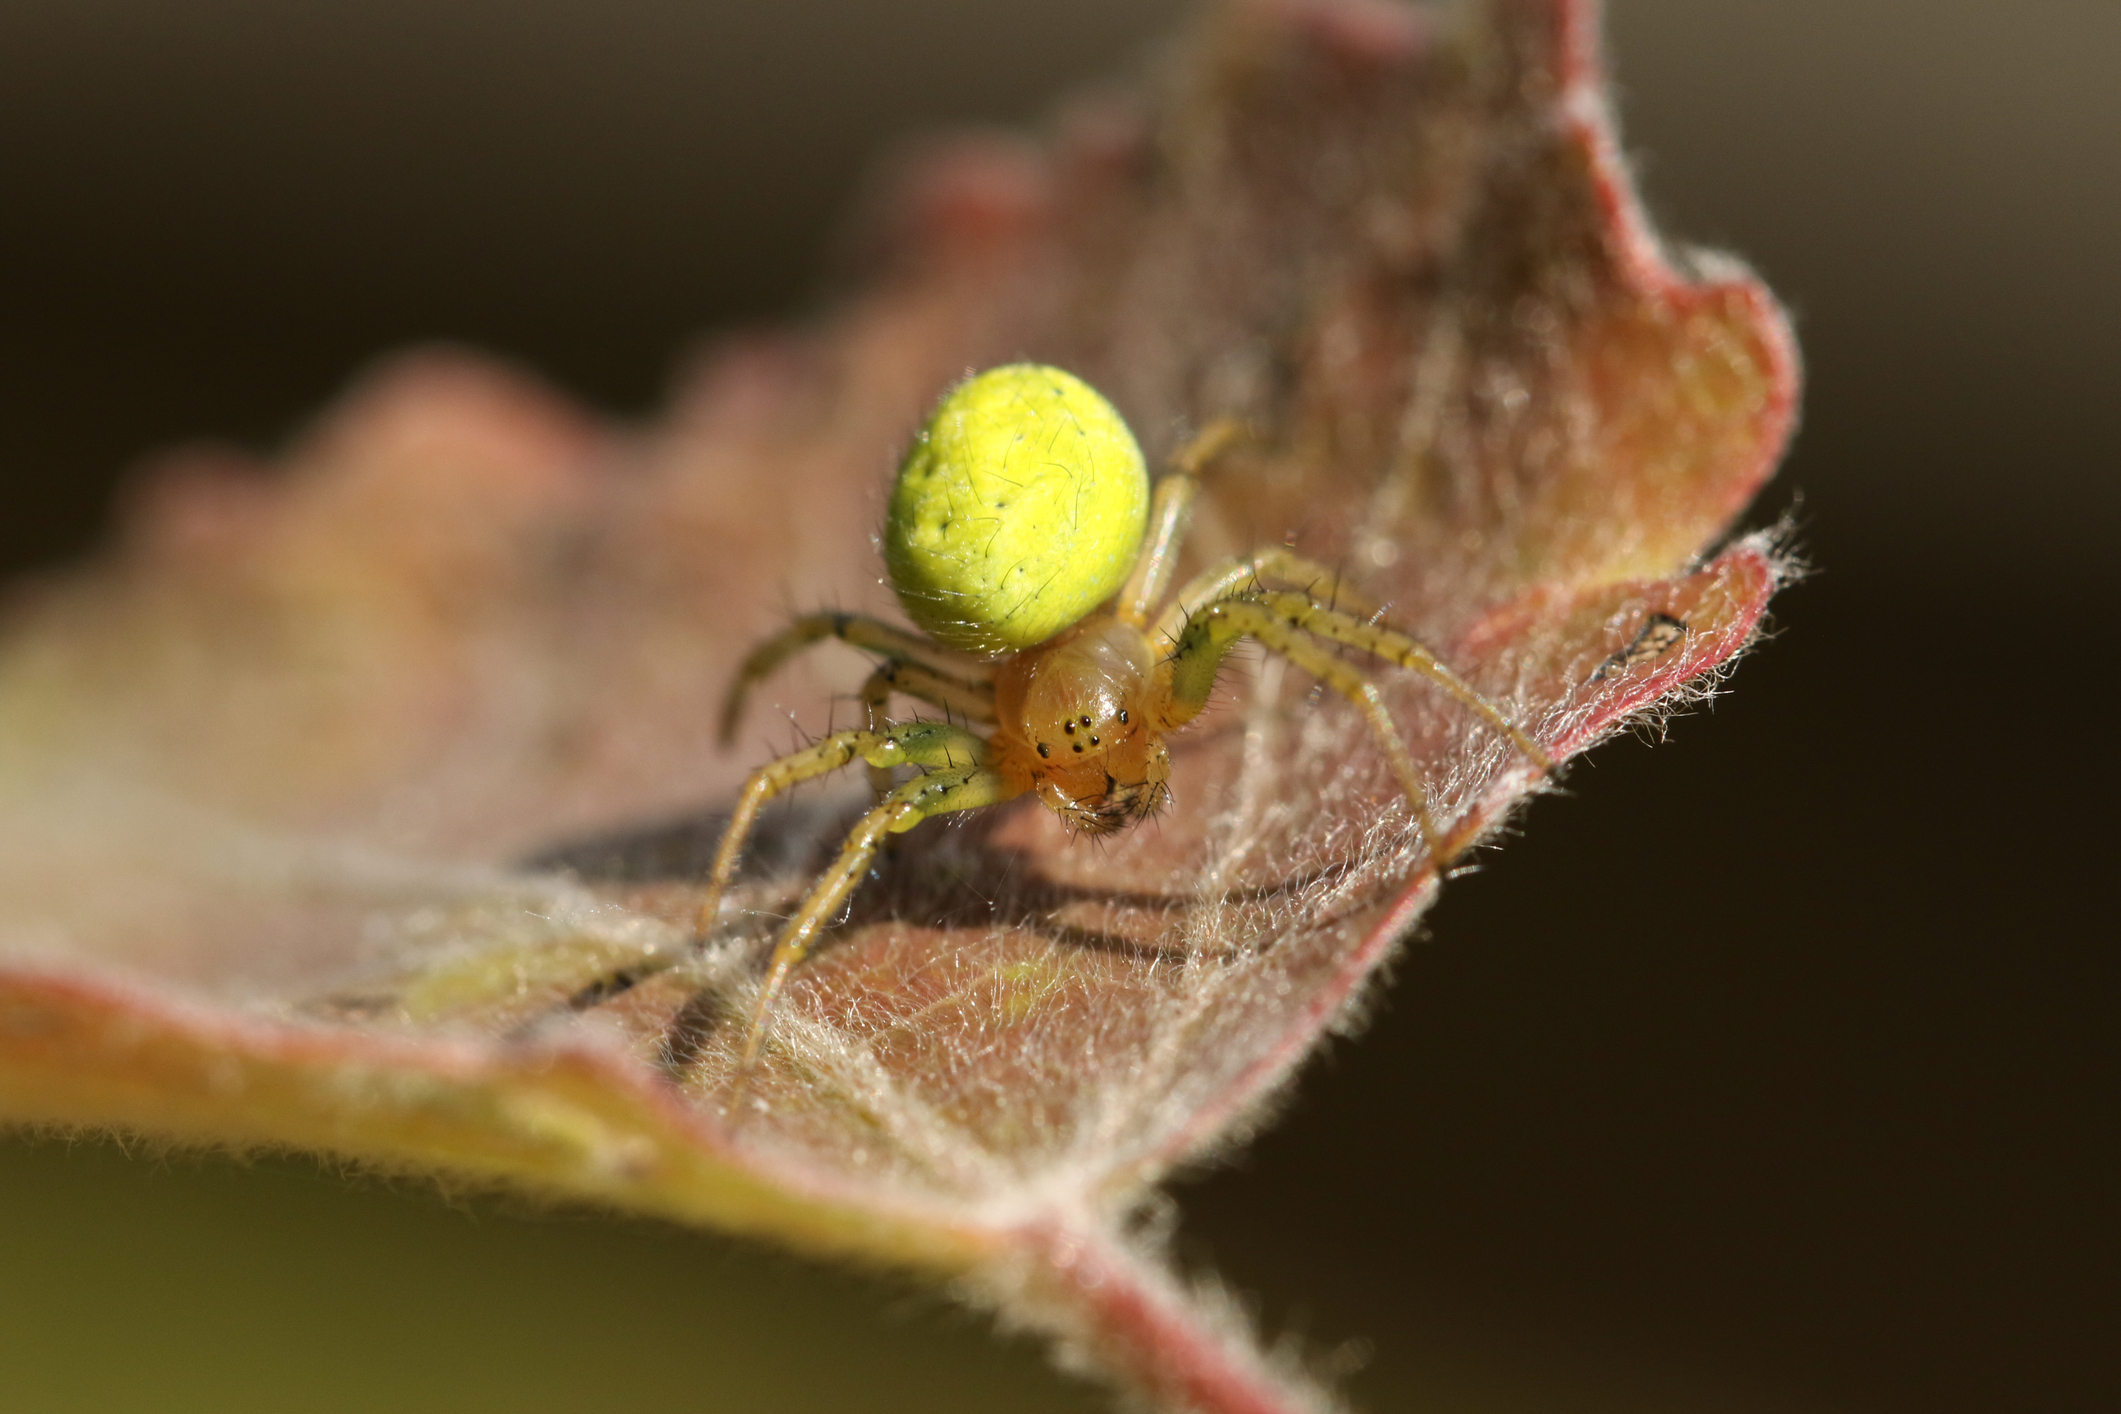 See the 9 Most Colorful Spiders Found Crawling Around England